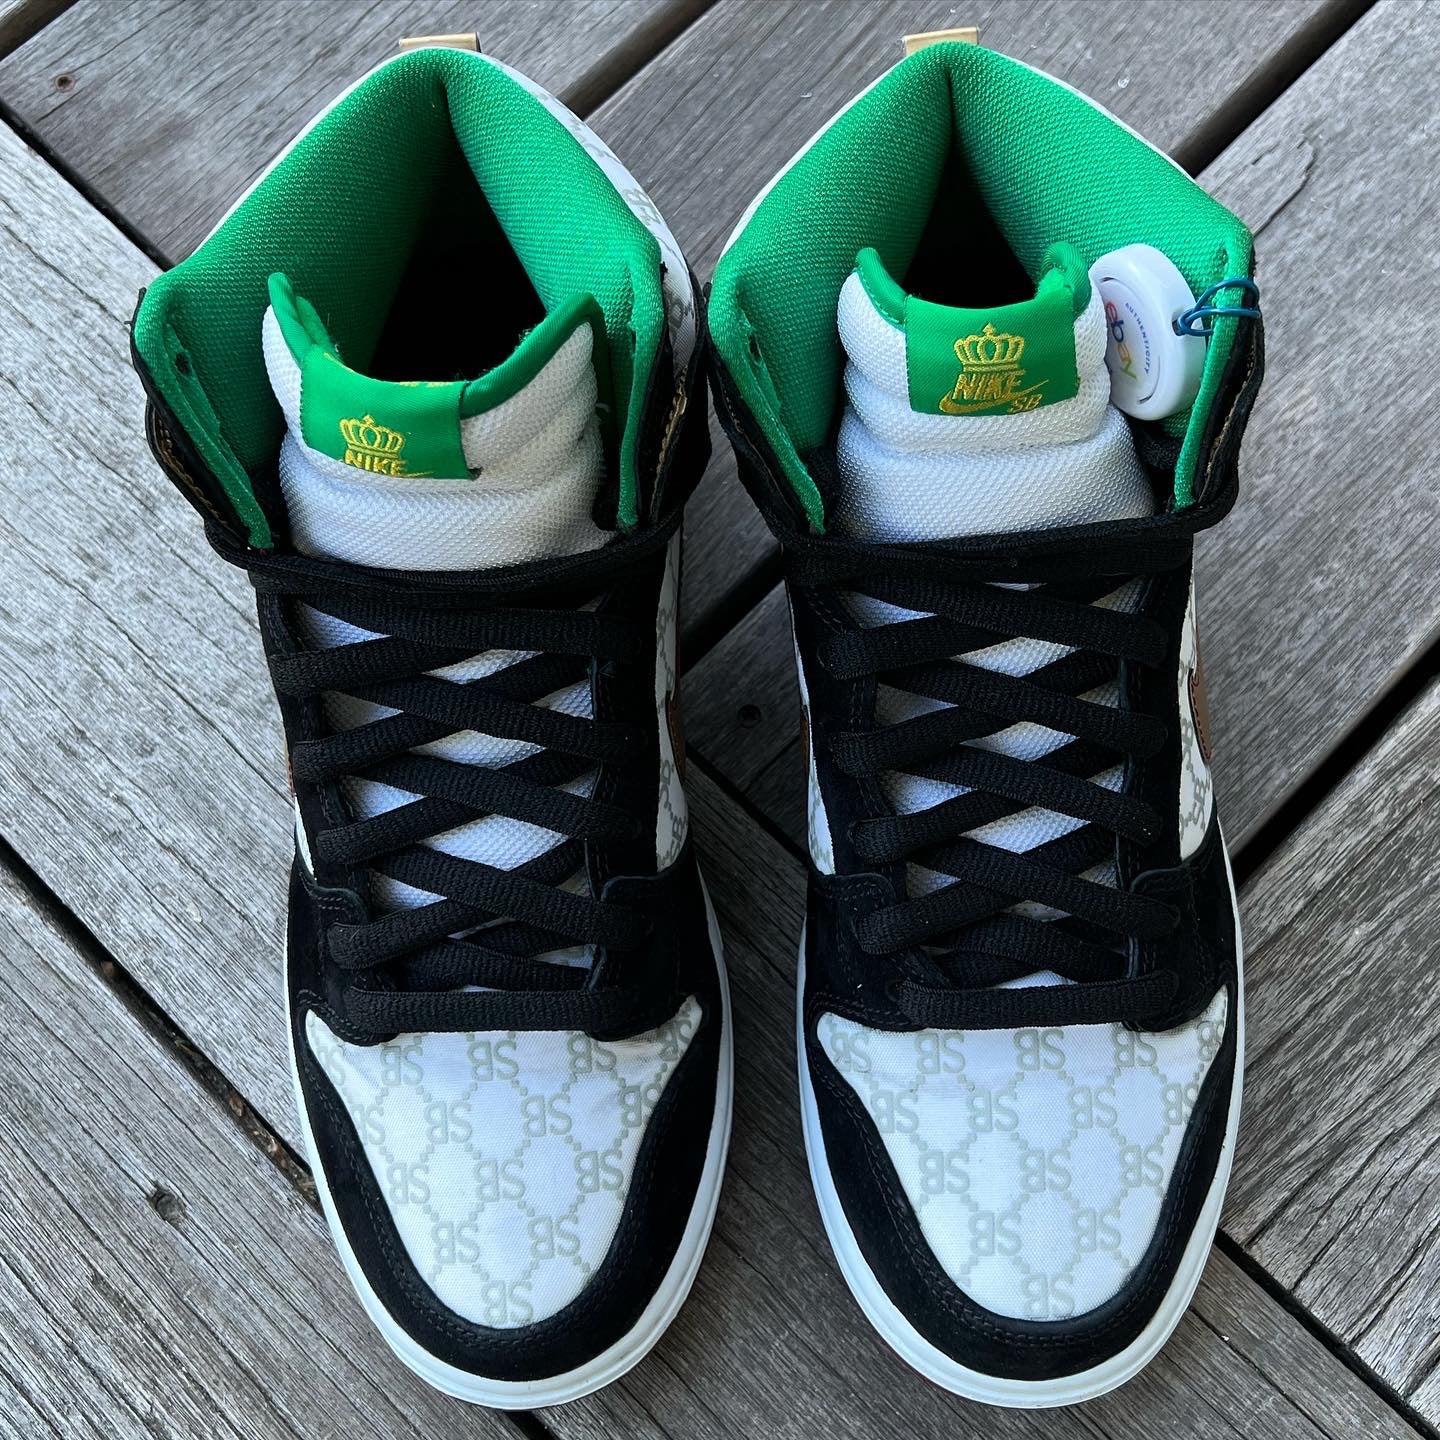 Nike SB Dunk High Paid in Full Size 10